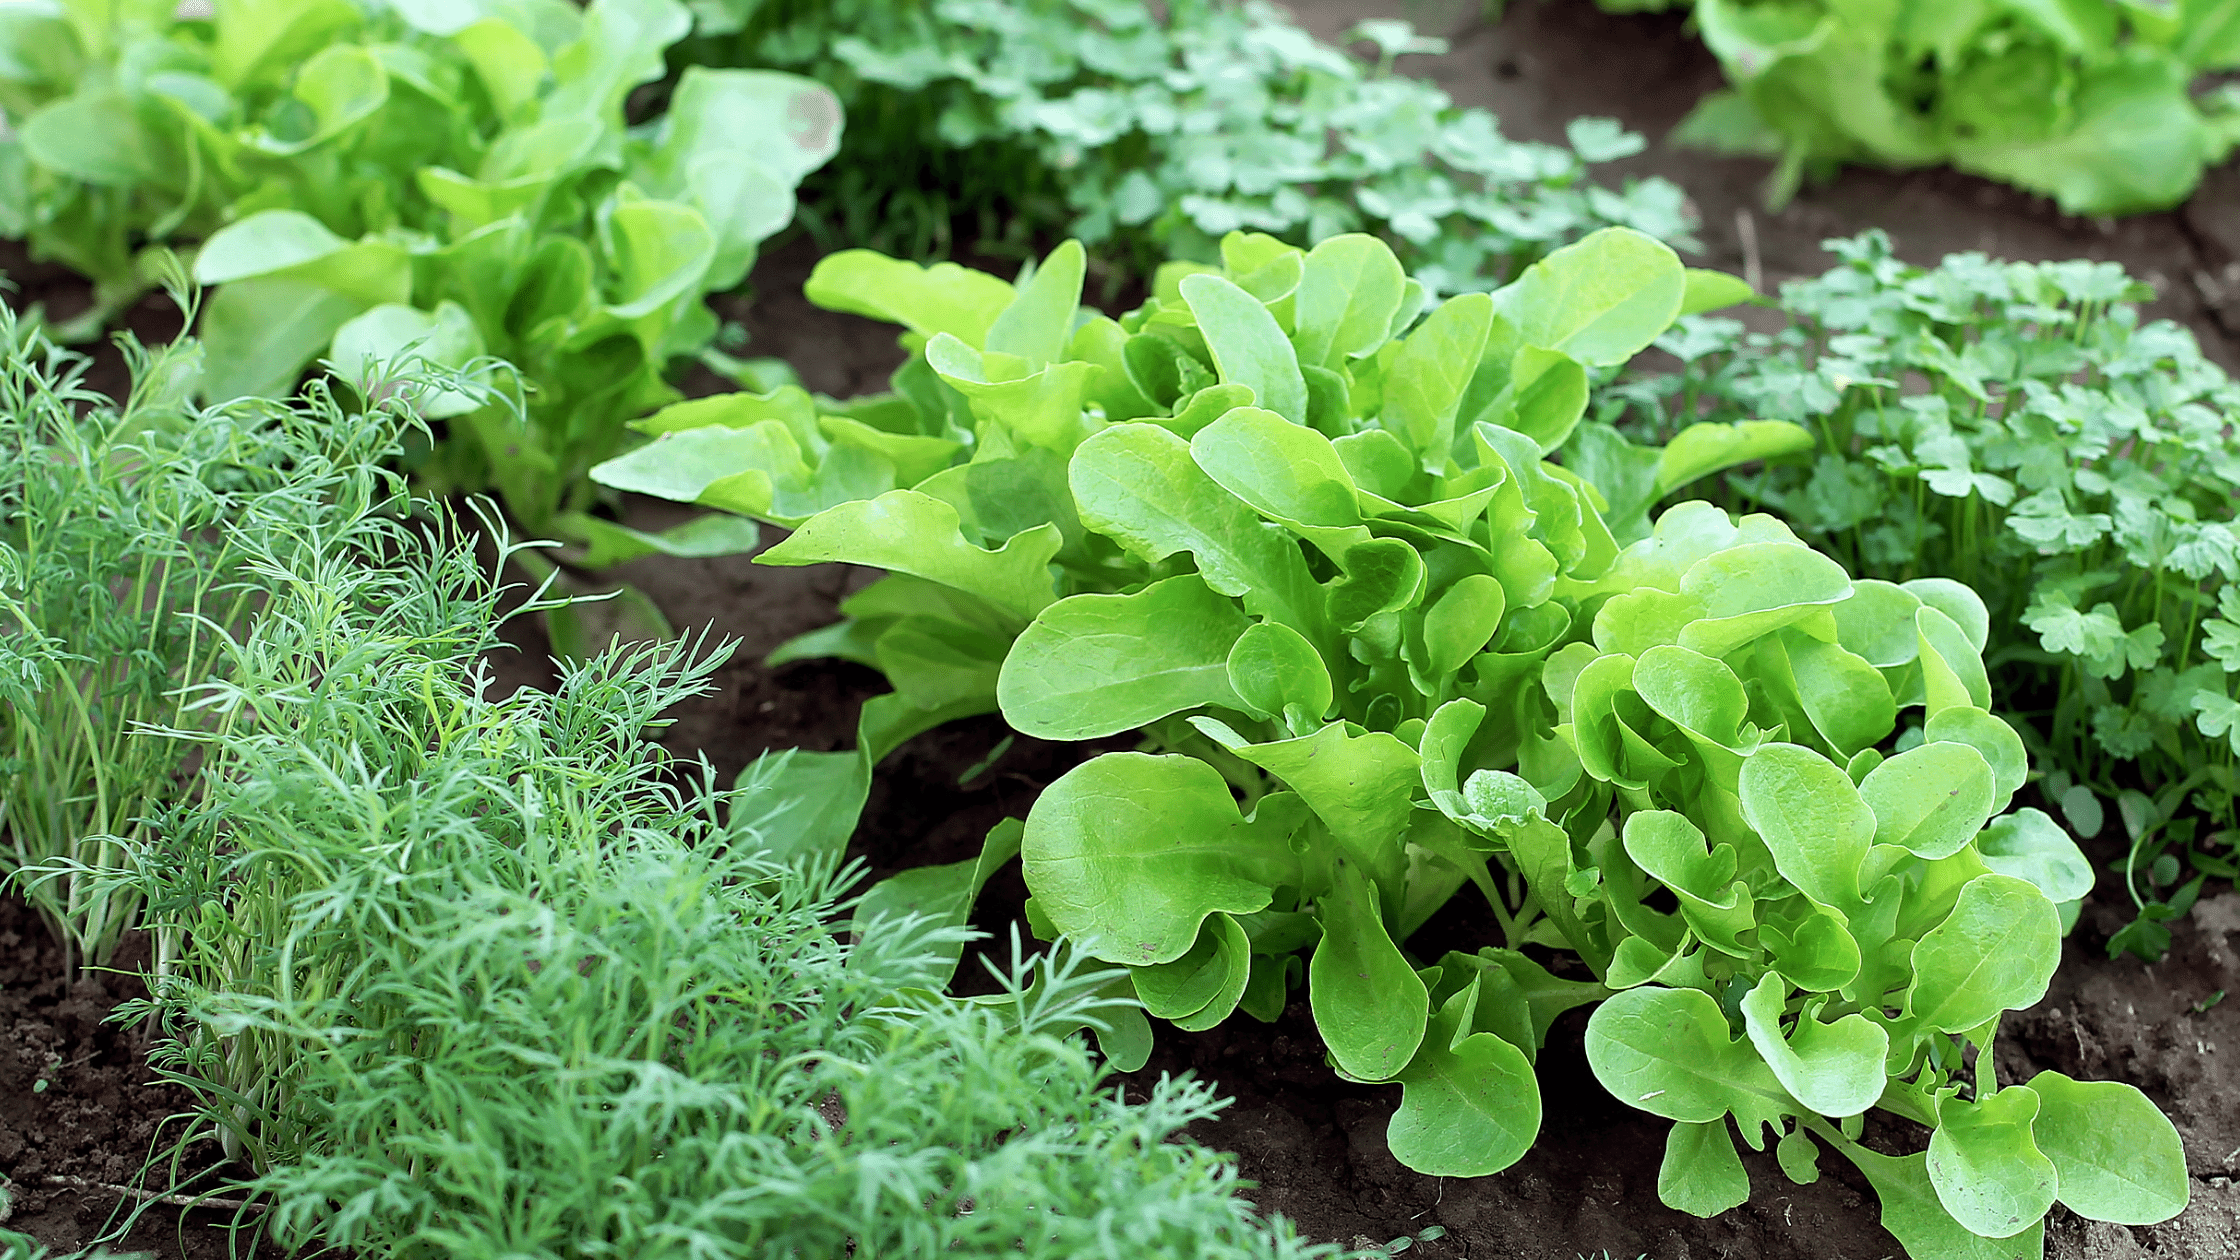 Love gardening but not sure how to tell if your garden will get the right amount of sun? Check out this blog post for some gardening tips to ensure your backyard vegetable garden has the right amount of sunlight.